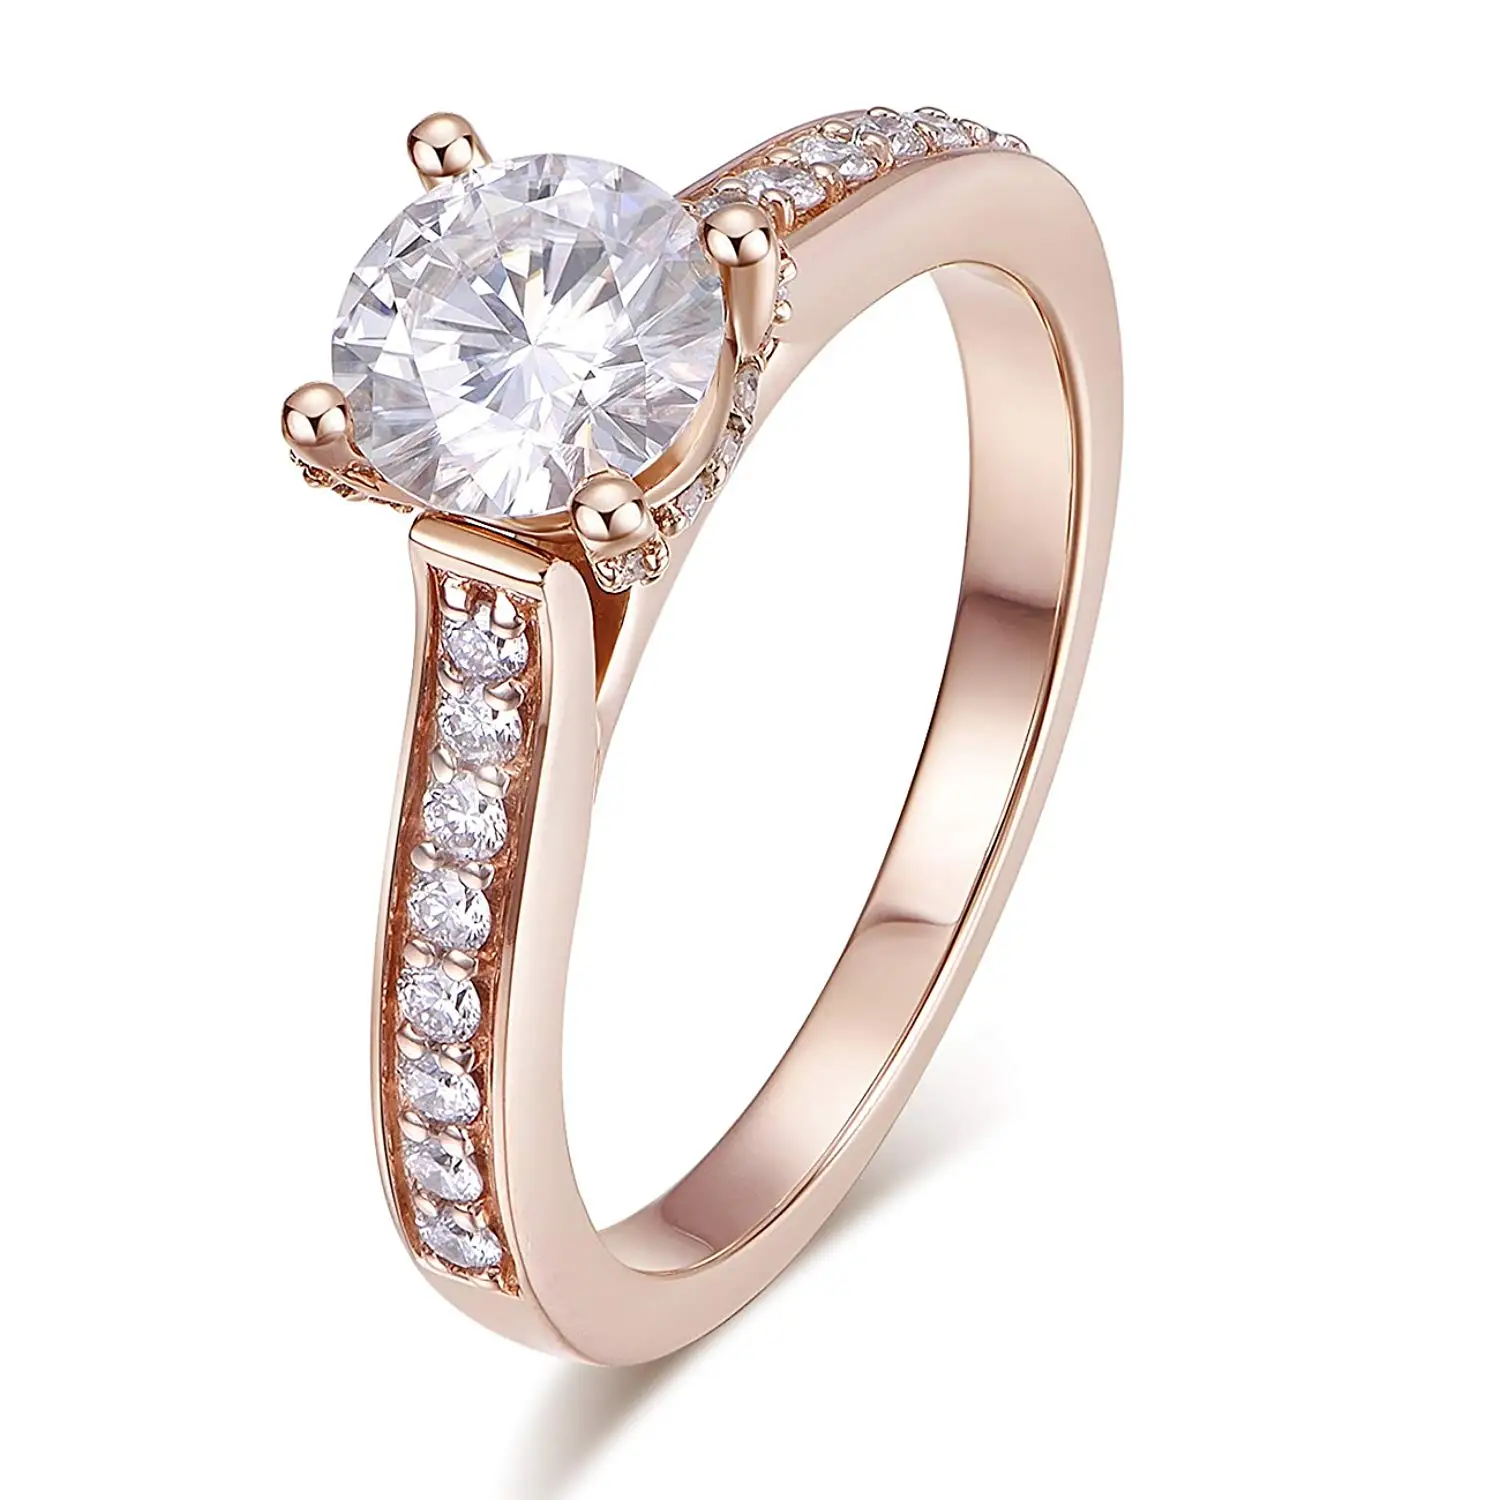 Cheap Tanishq Solitaire Rings, find Tanishq Solitaire Rings deals on ...